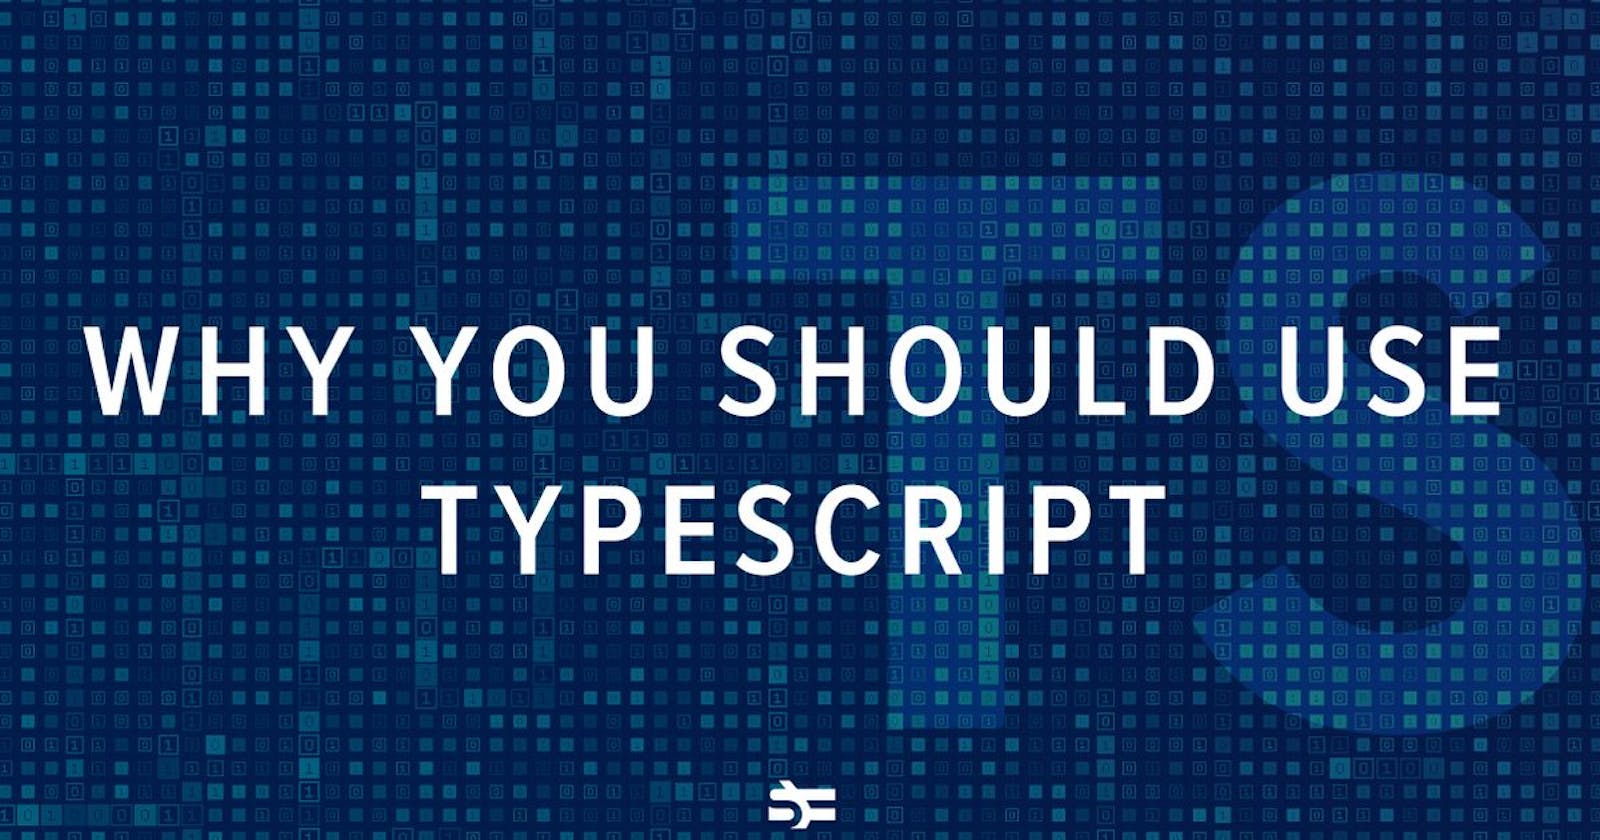 Why you should use Typescript?